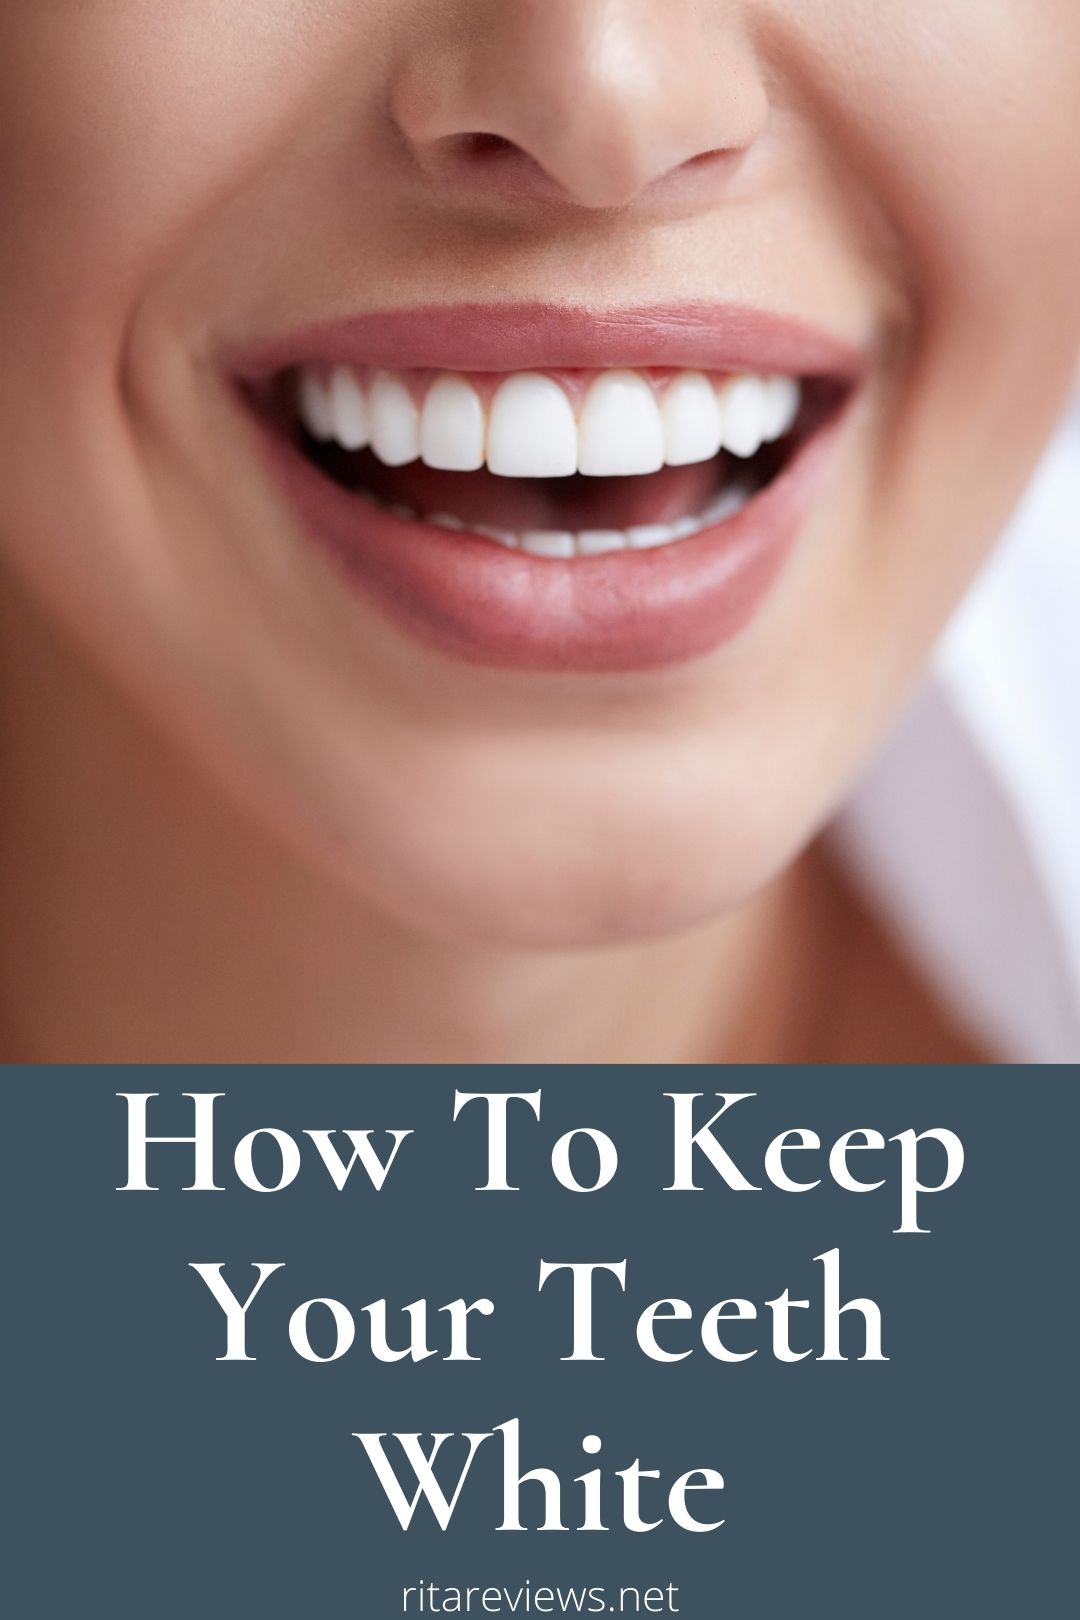 How To Keep Your Teeth White